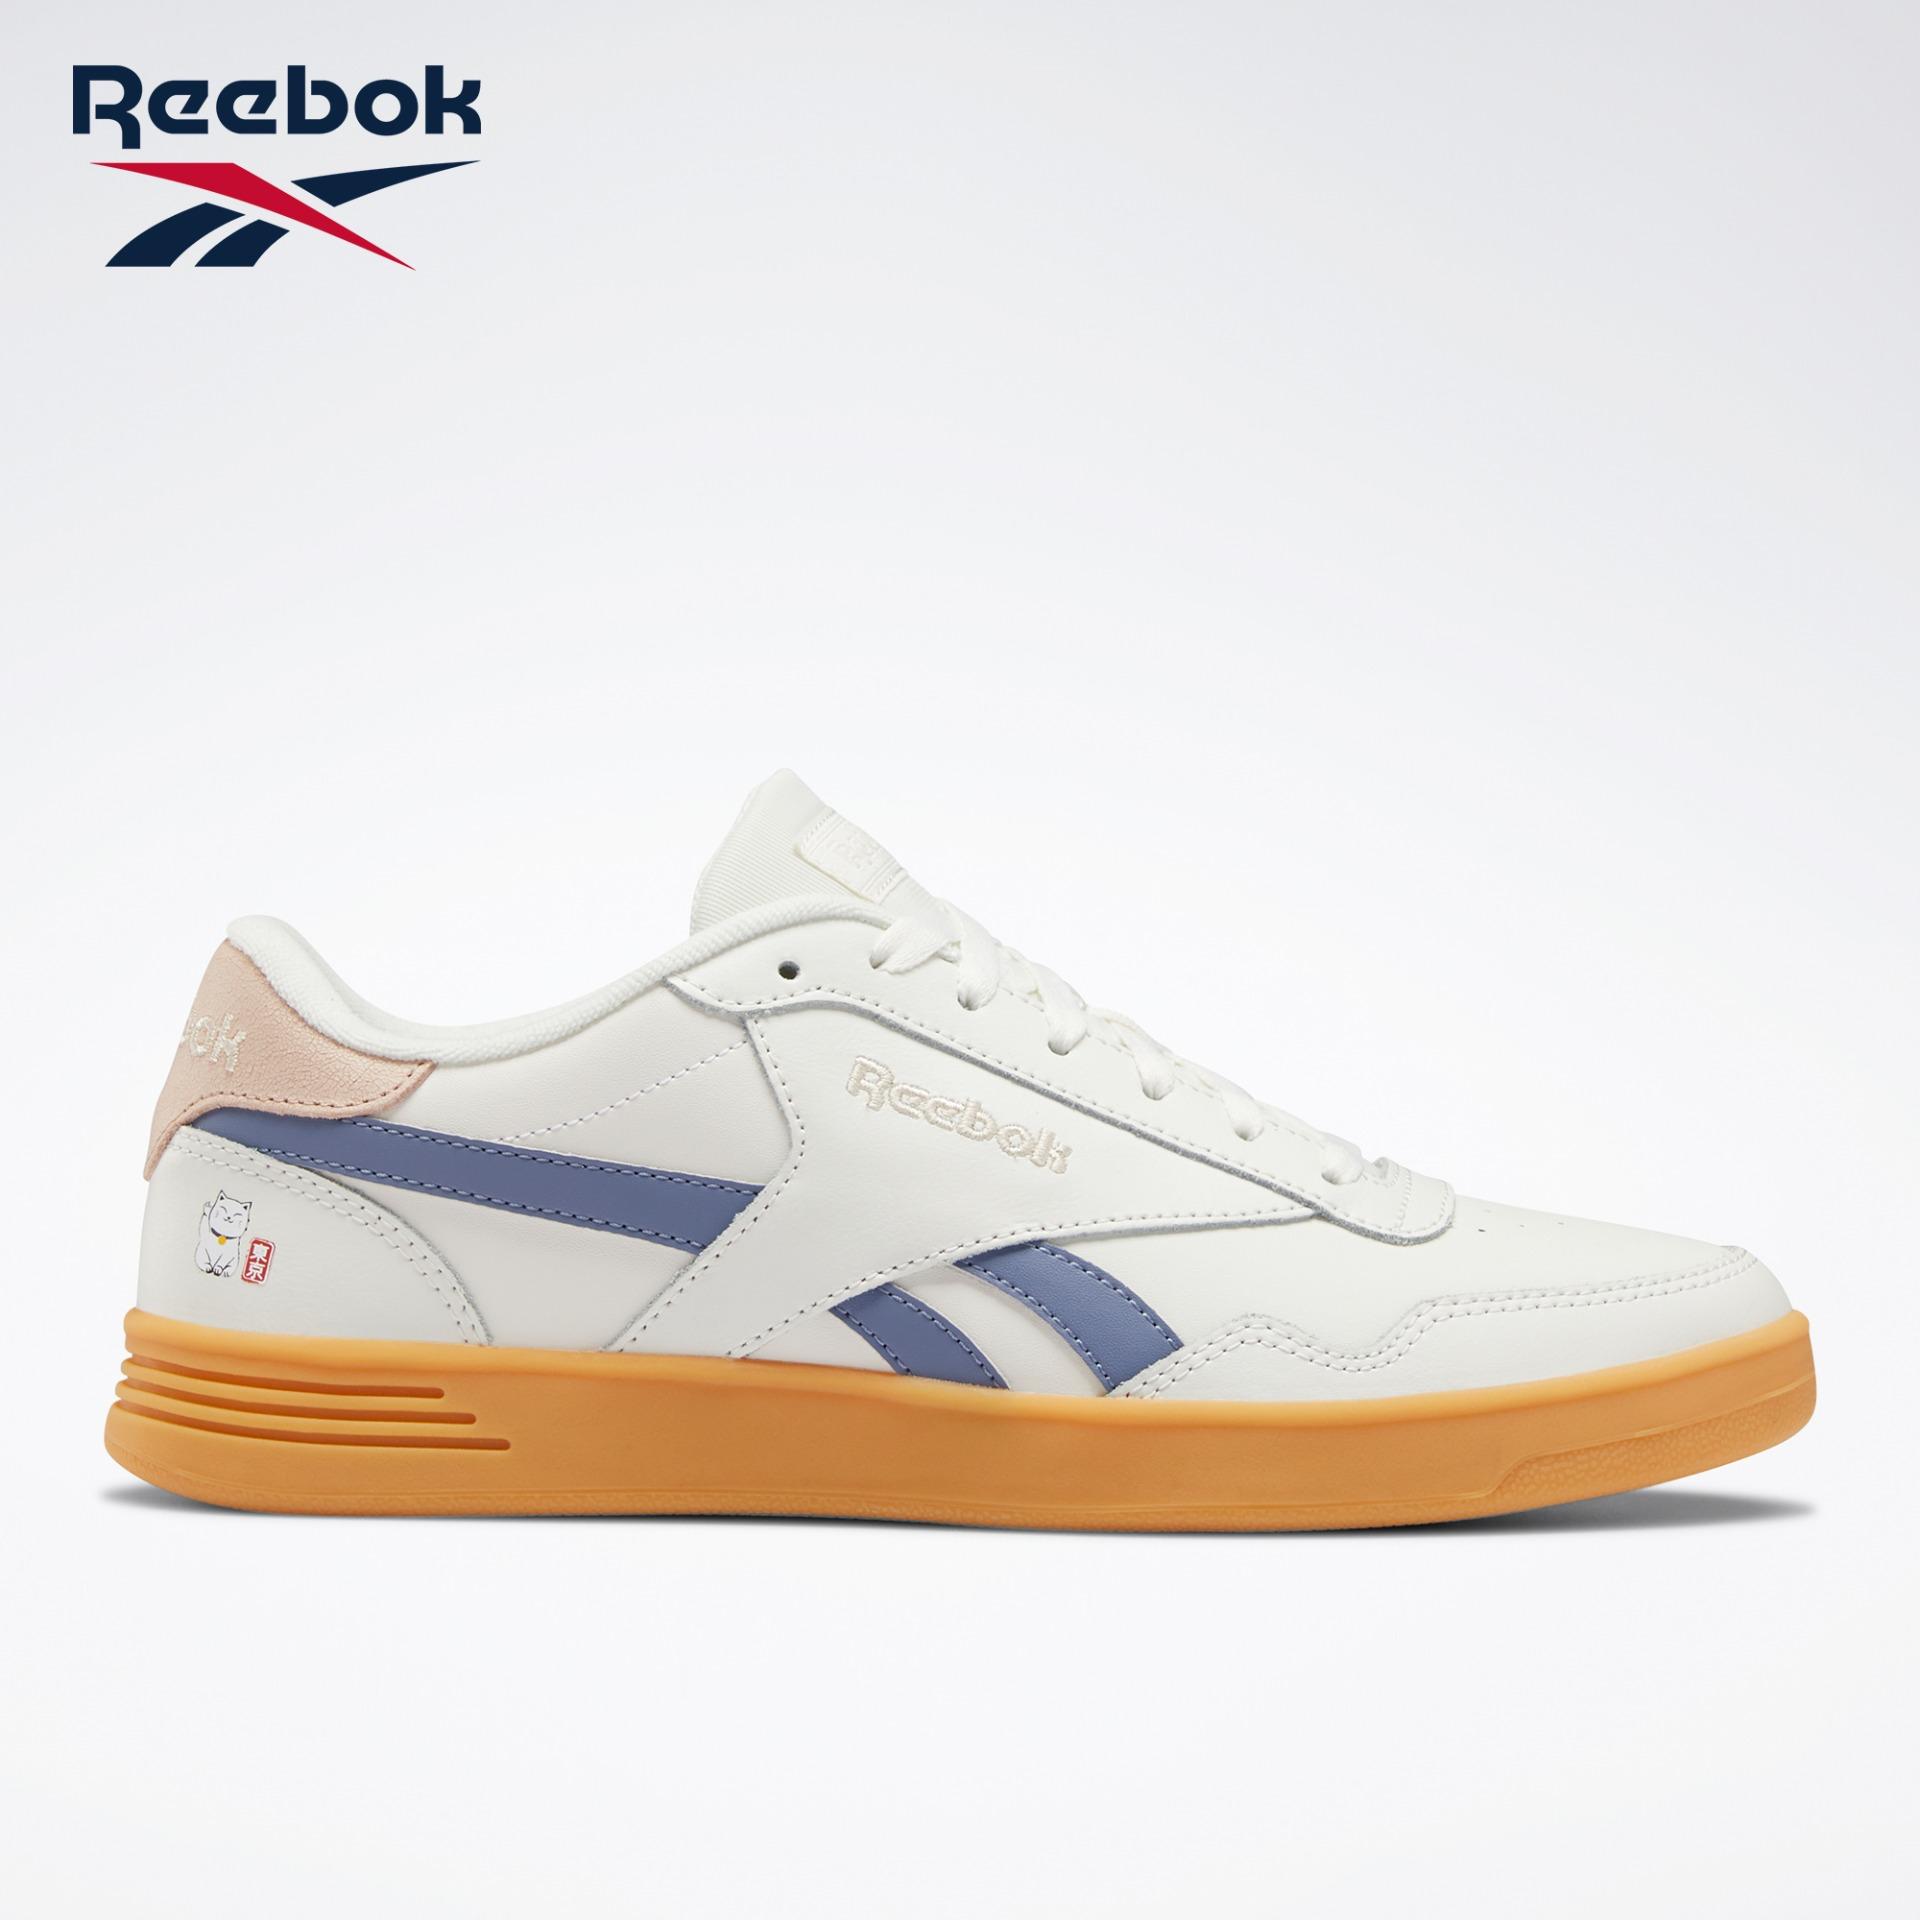 reebok shoes online prices